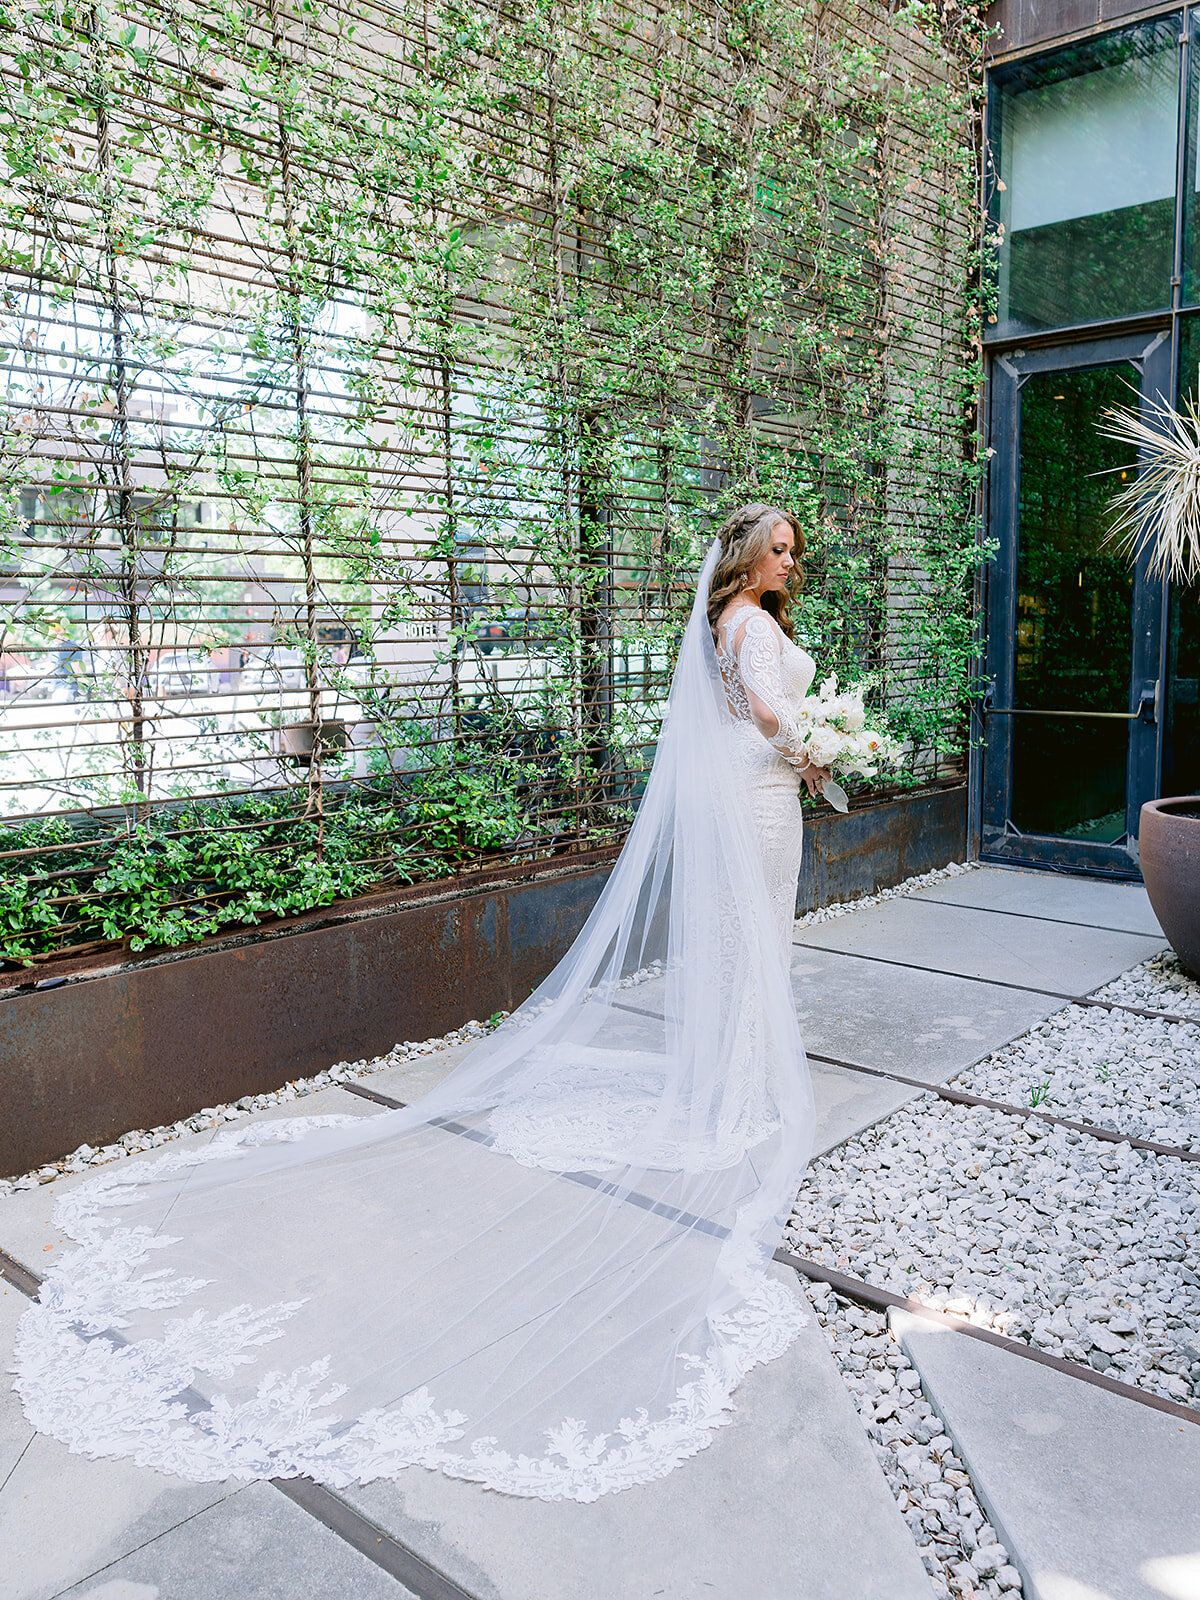 The bride poses in the atrium of the South Congress Hotel with her veil falling behind her